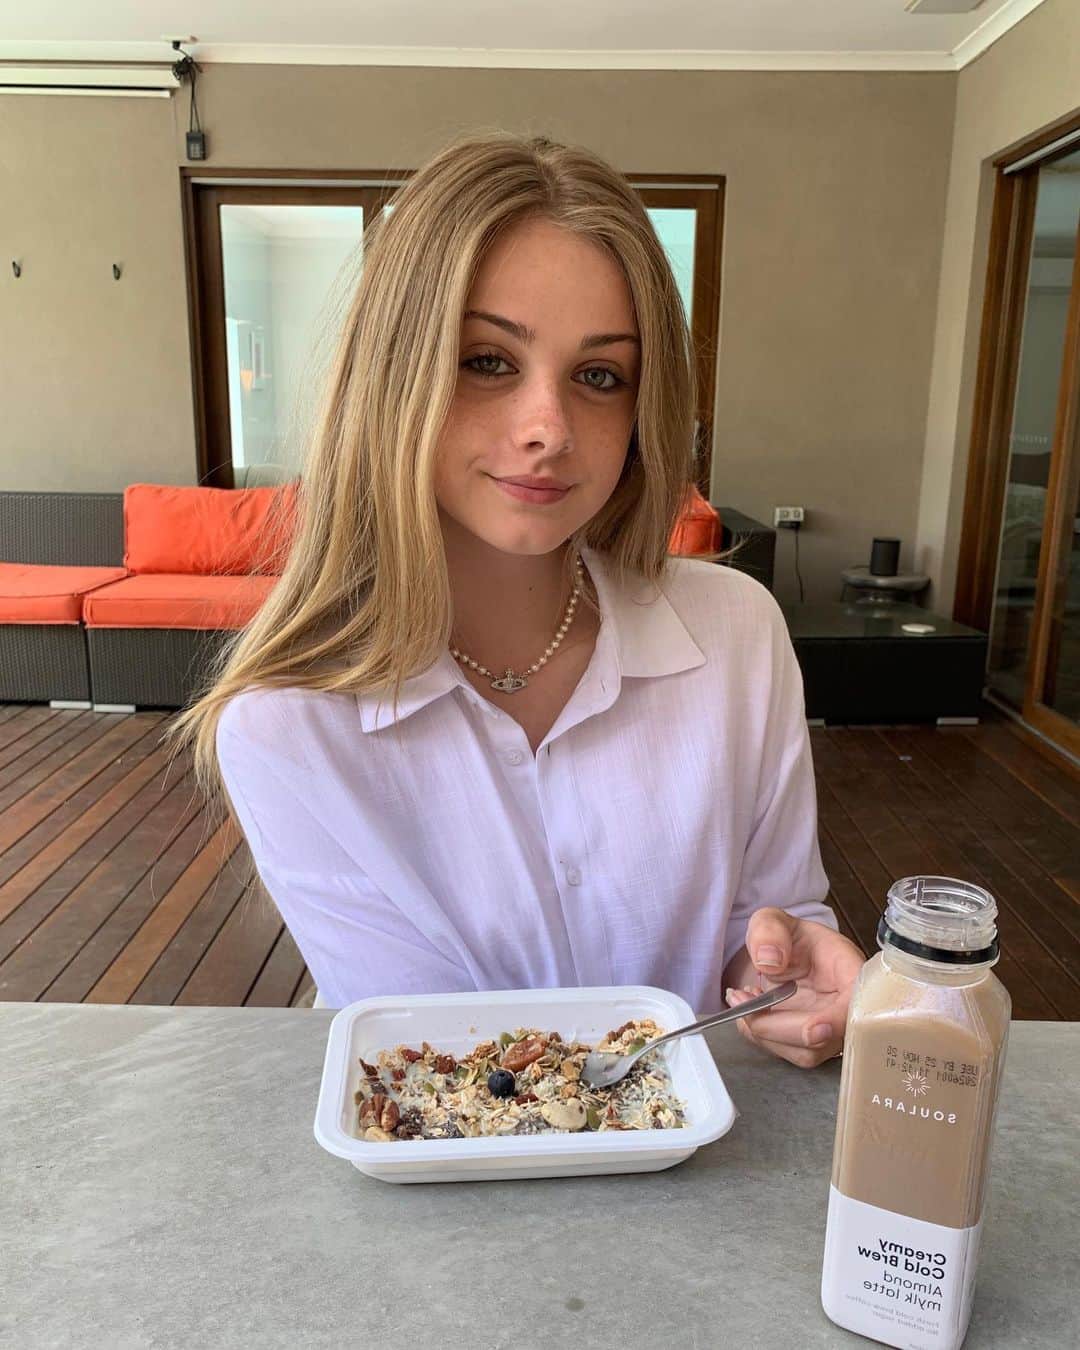 Indi Woollardのインスタグラム：「@livesoulara food is absolutely delicious 💕 use my code INDI30 for $30 off your first order. ( until 28th Feb 21 ) Soulara is the leading food & lifestyle brand in Australia offering 100% plant-based meals that are nutritionally designed, featuring unique and innovative recipes focused on nurturing the body, mind and spirit. #food #yum #plantbased #health #healthylifestyle #indiawoollard #woollard #livesoulara #eathealthy」